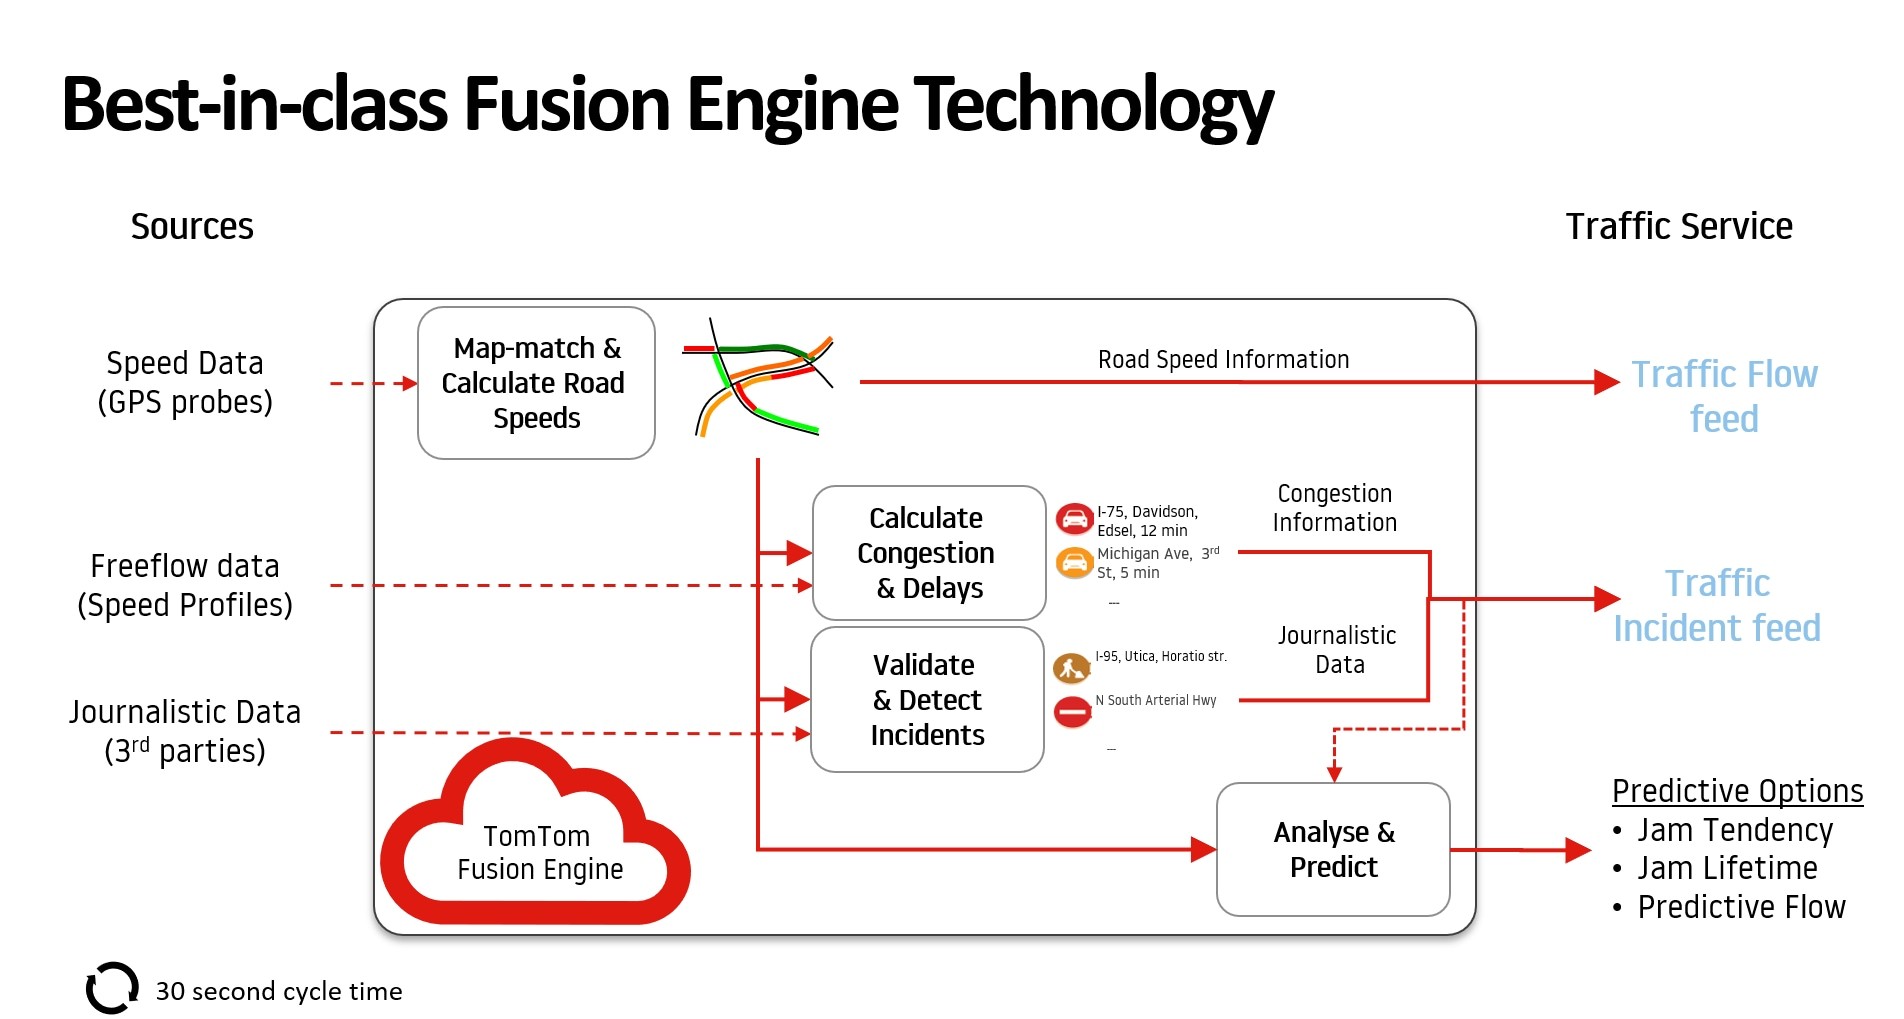 Best-in-class fusion engine technology